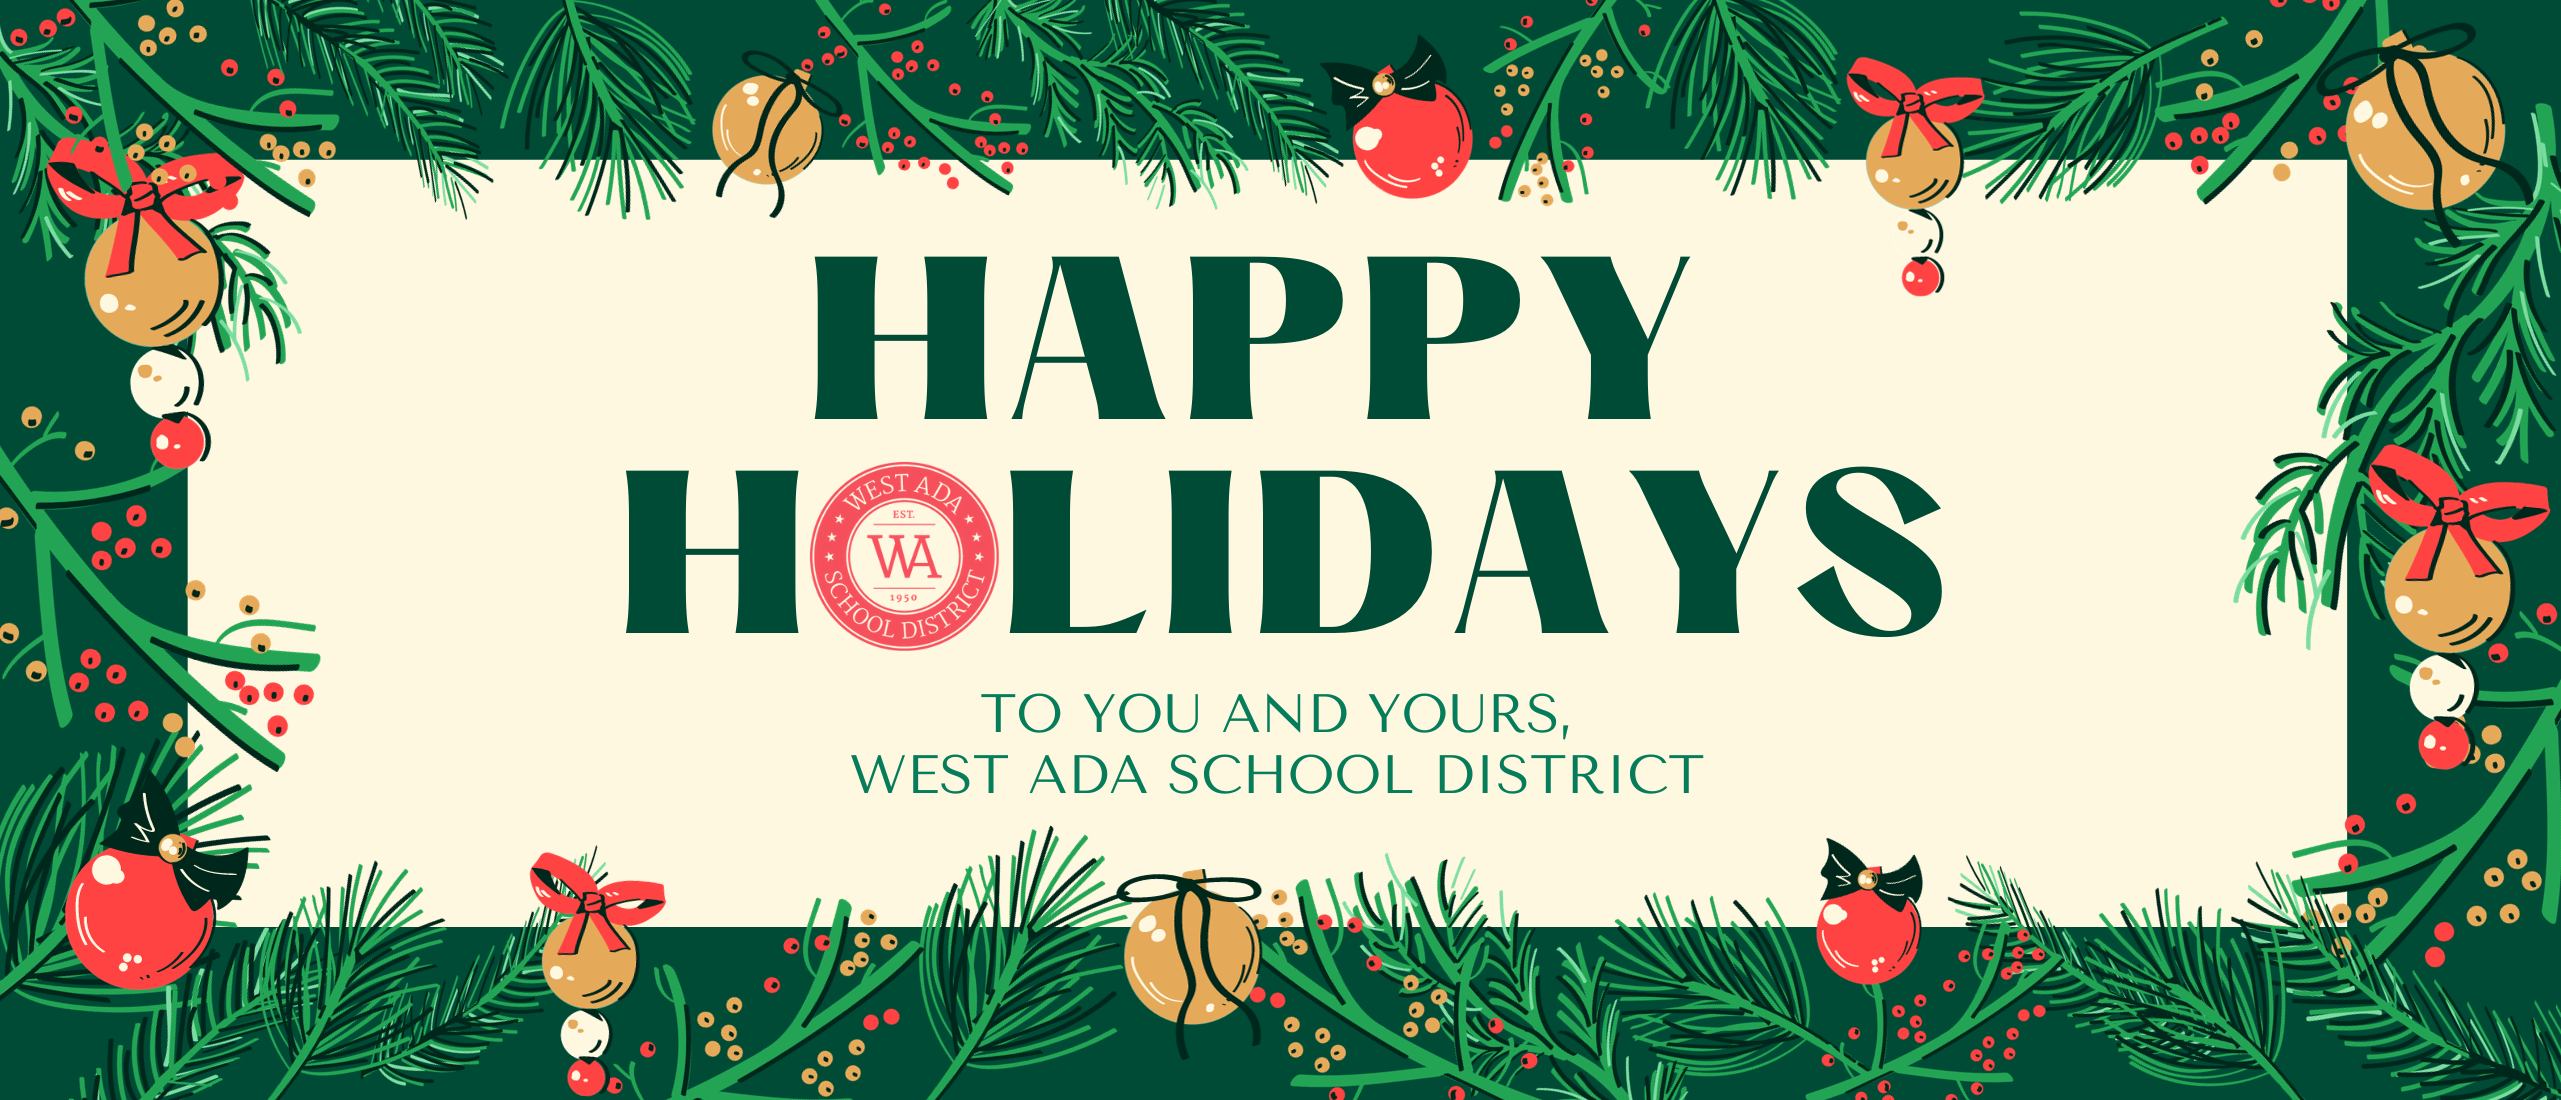 happy holidays to you and yours, west ada school district